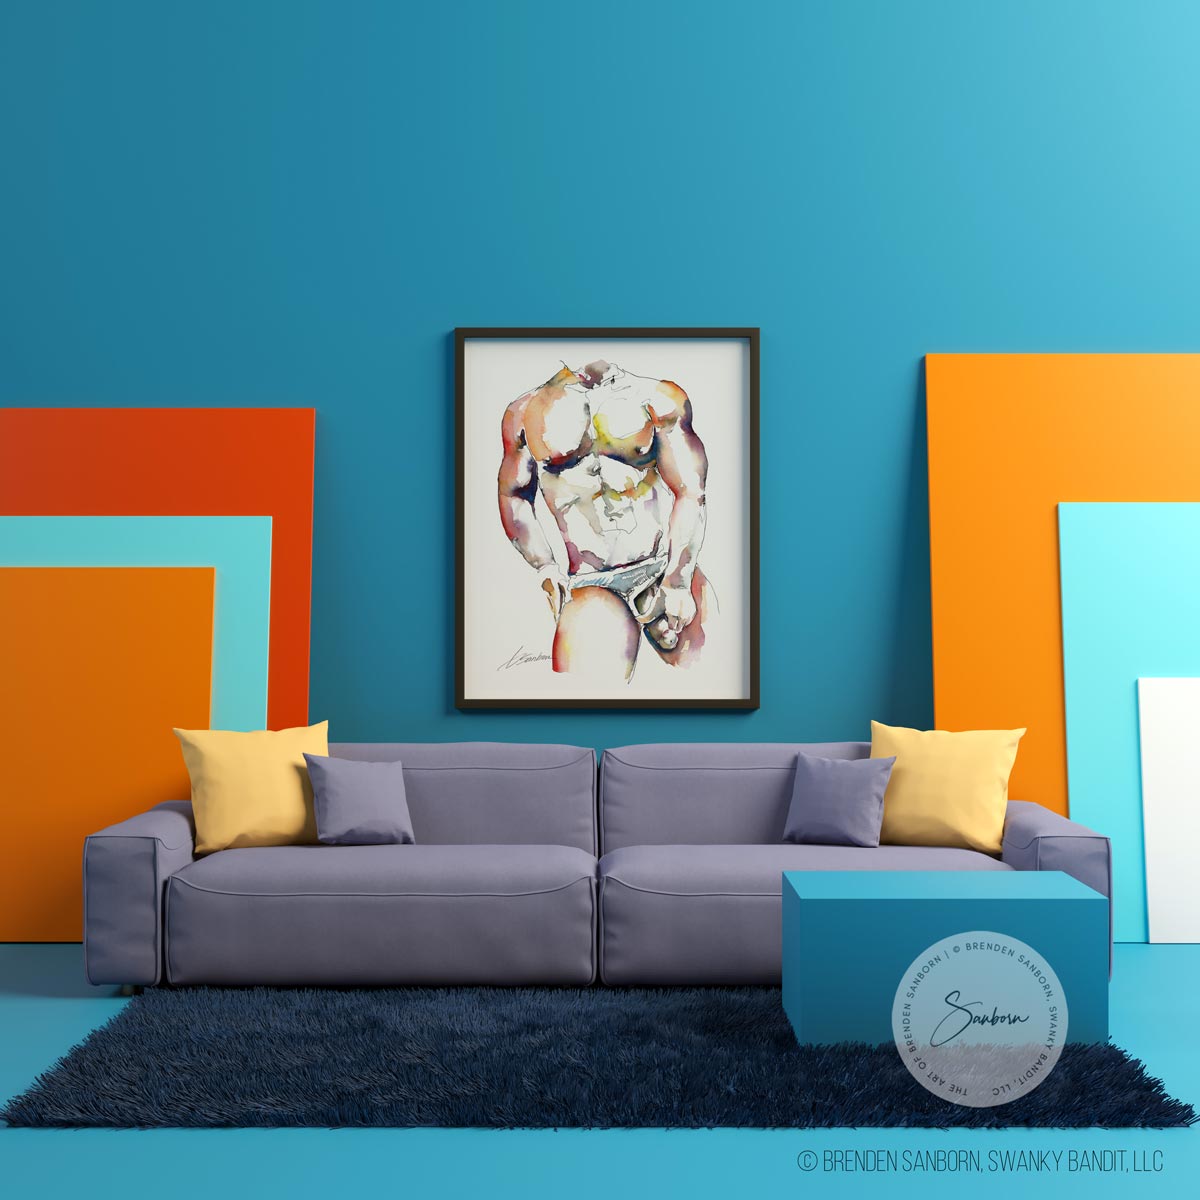 Massive Musculature in Tight White Underwear, Strong Arms - Giclee Art Print